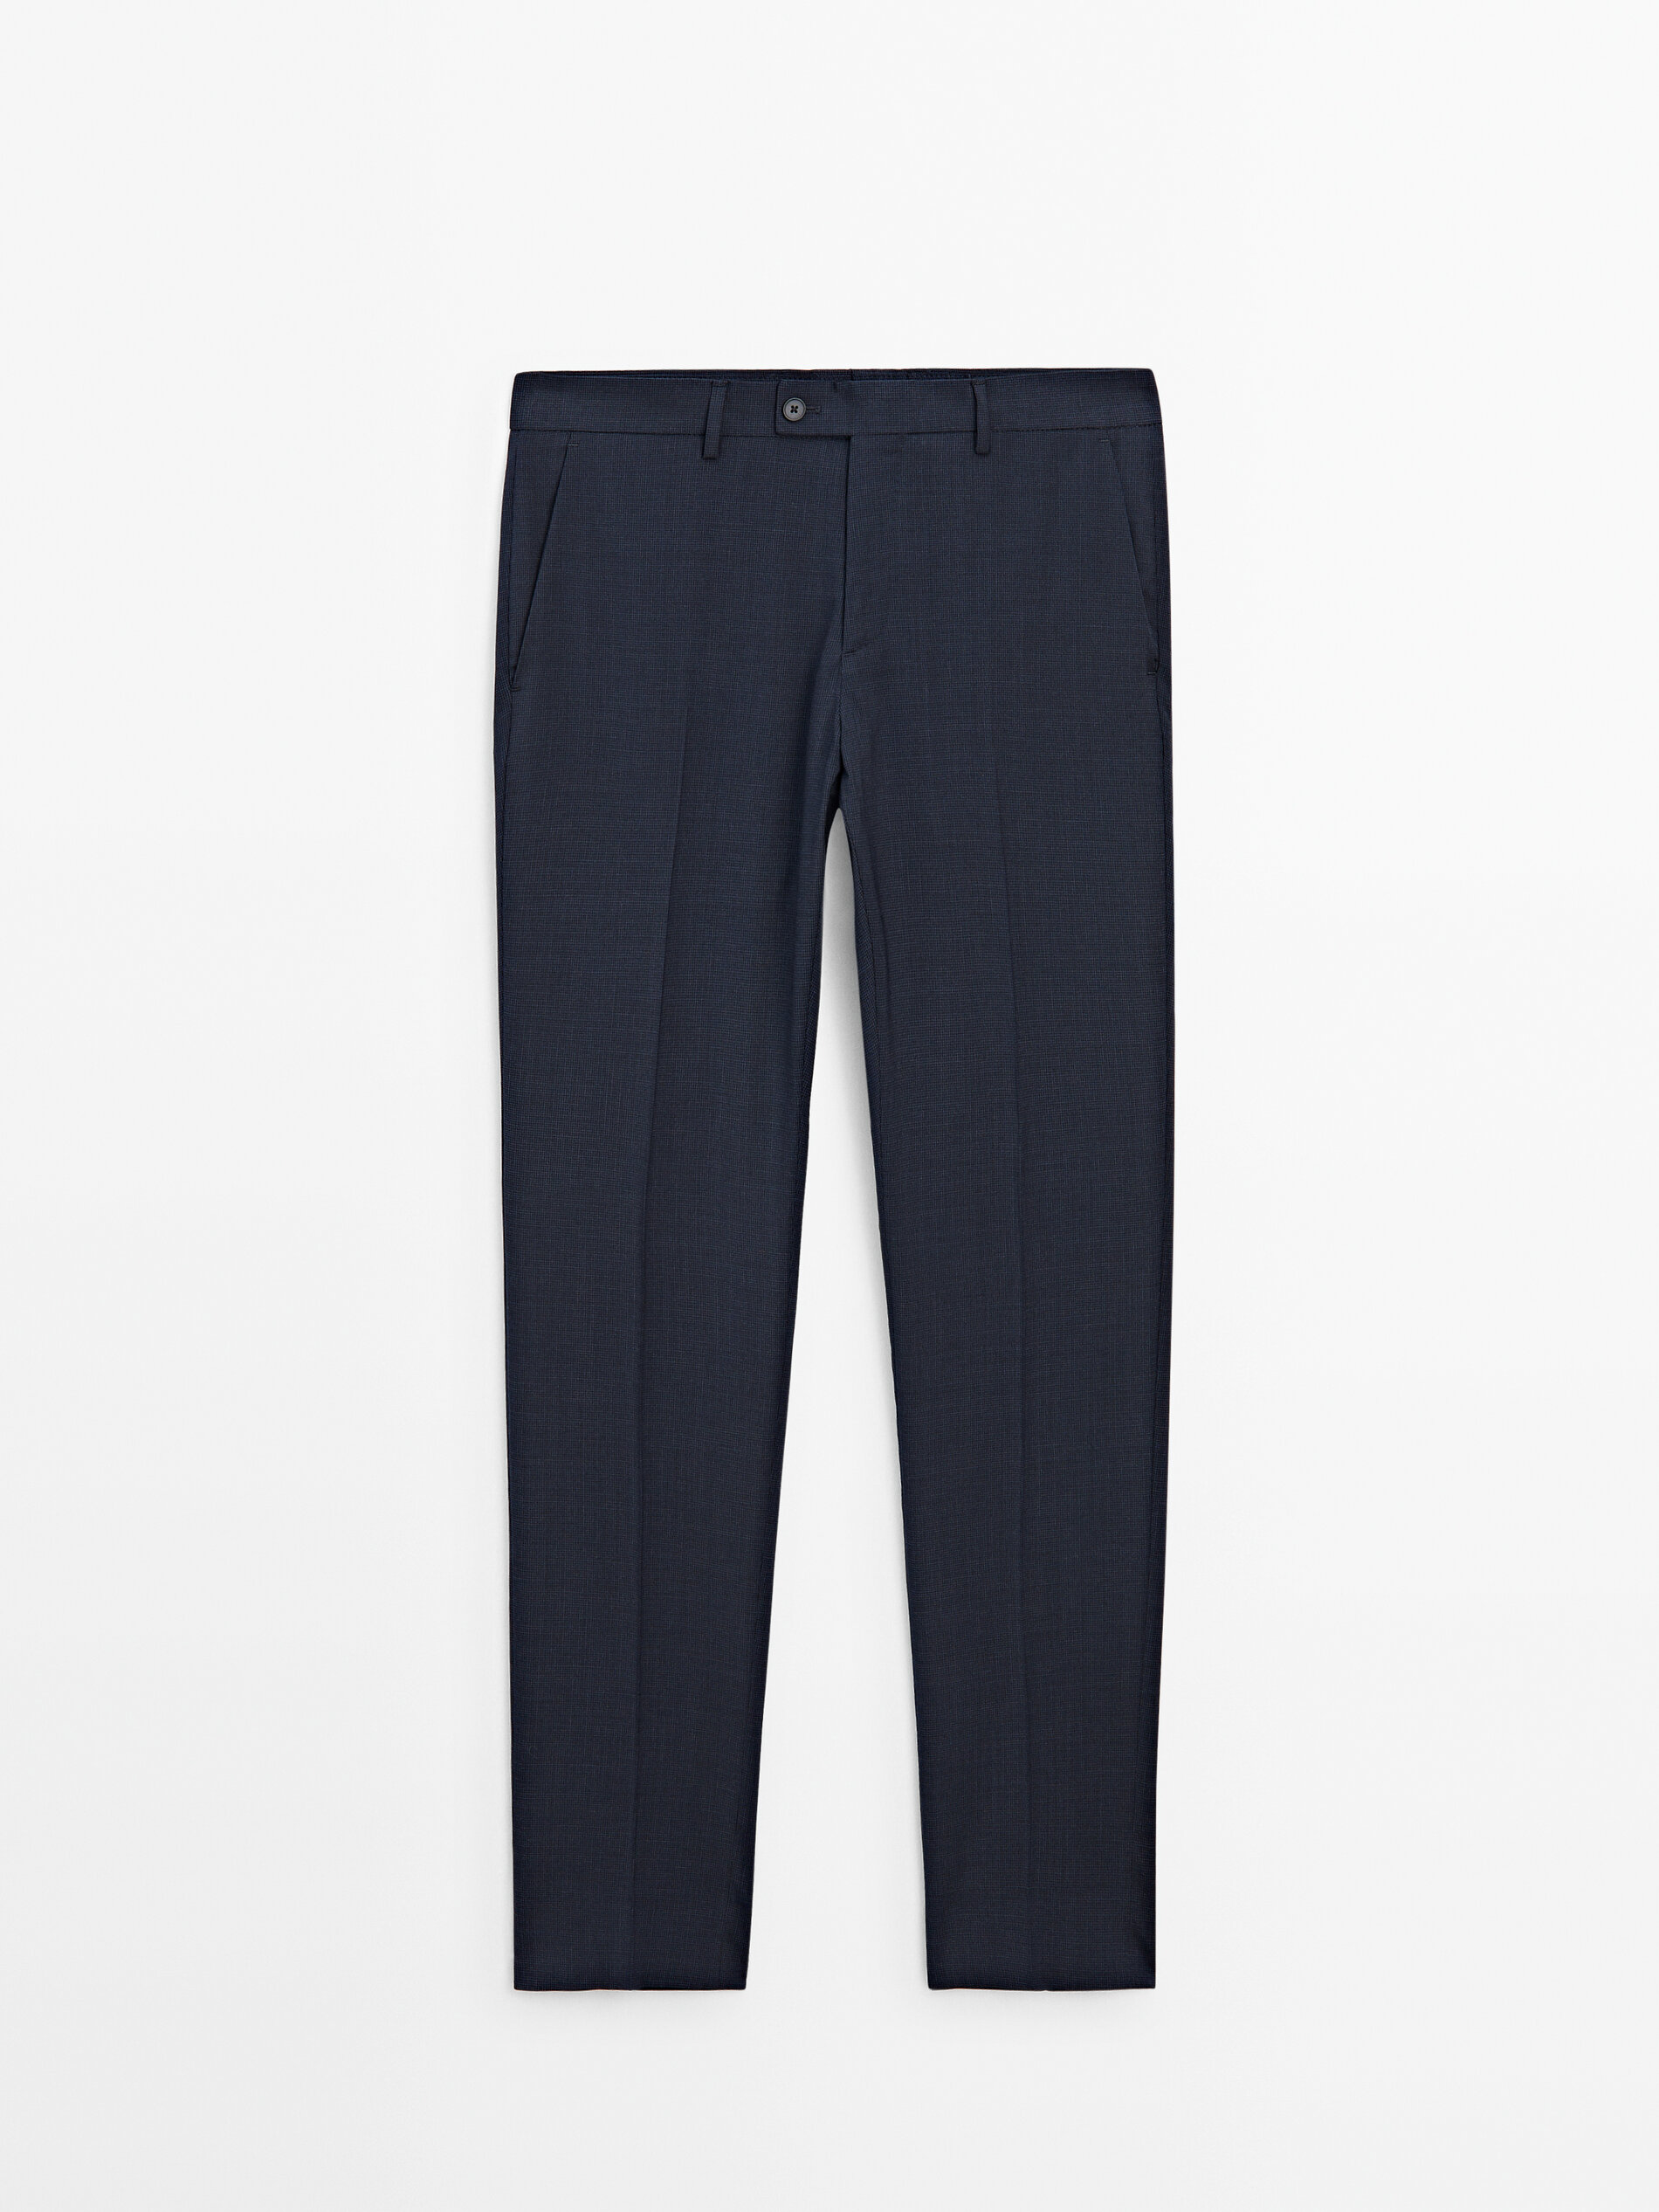 The Ultimate Guide To Wool Trousers | The Journal | MR PORTER